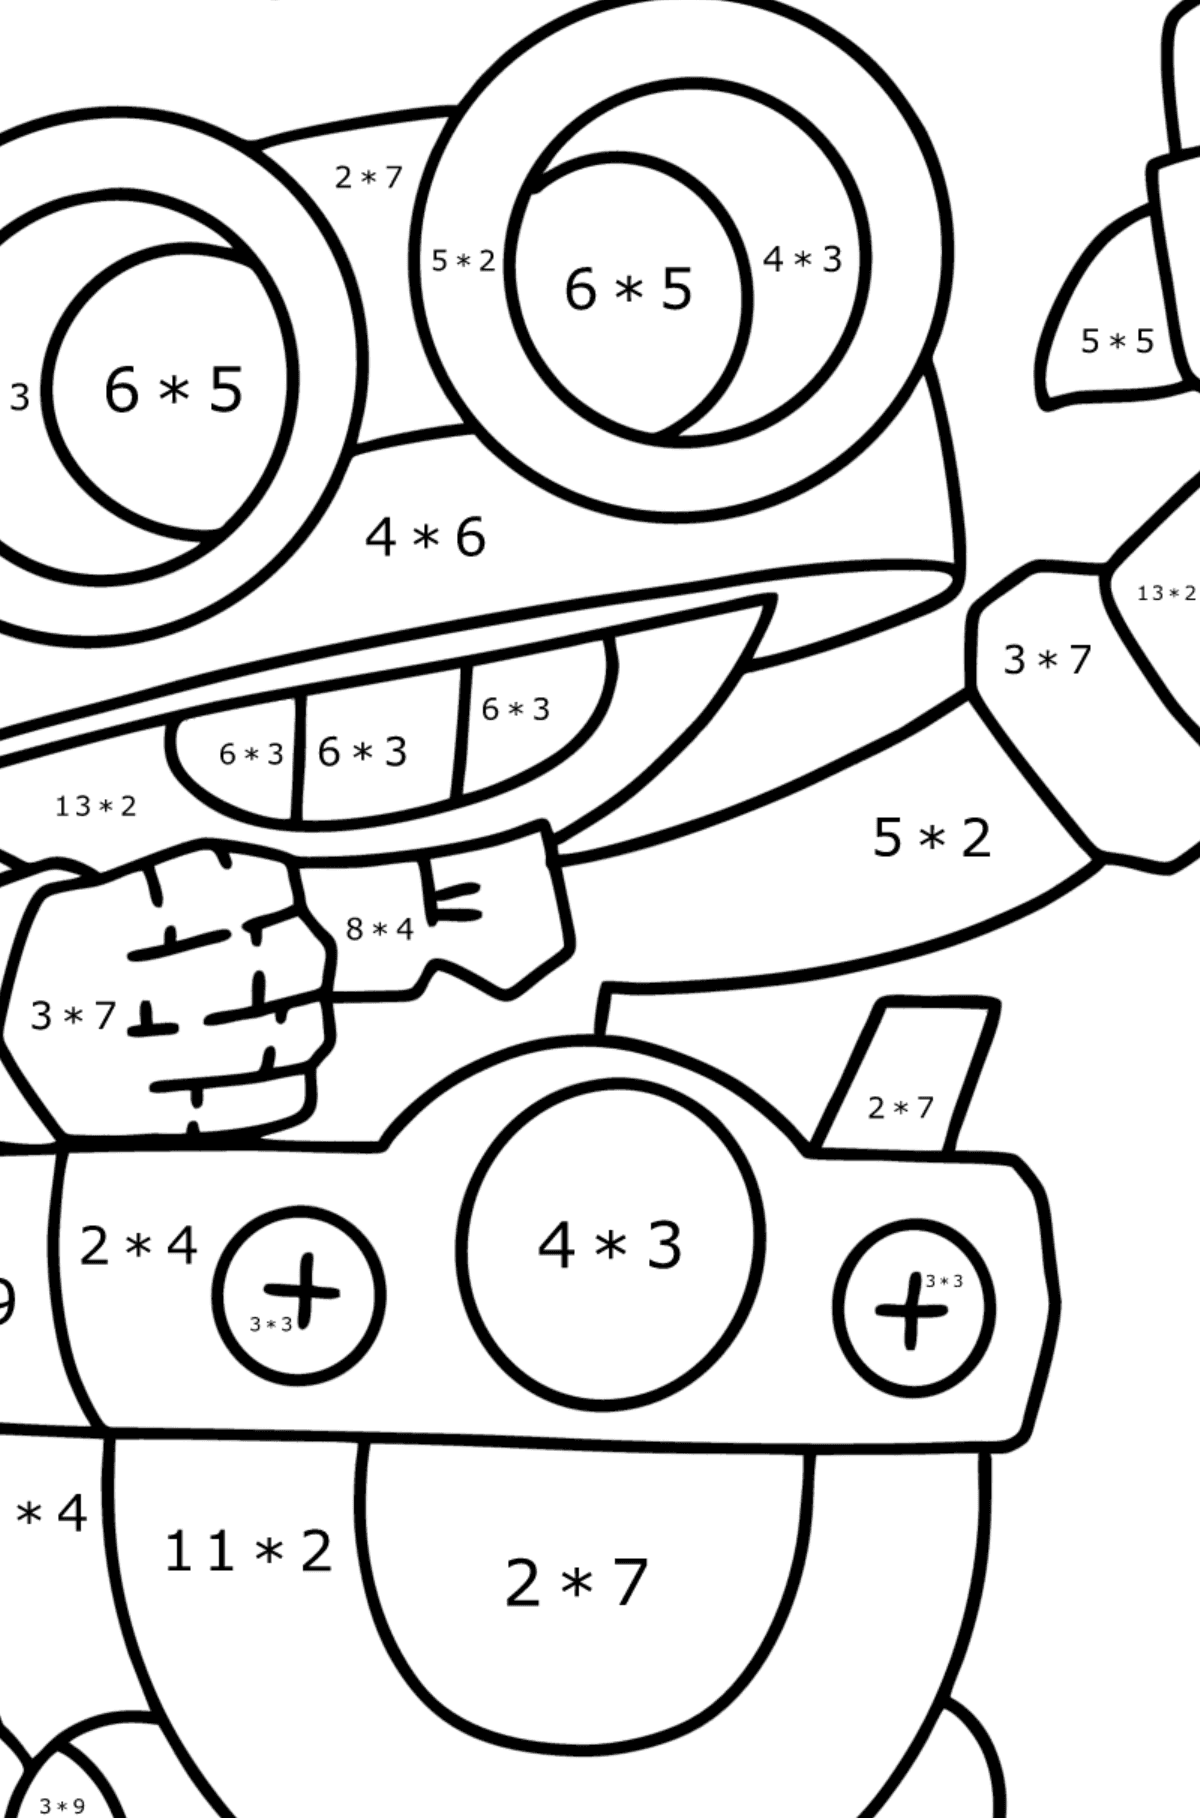 Brawl Stars Carl coloring page - Math Coloring - Multiplication for Kids